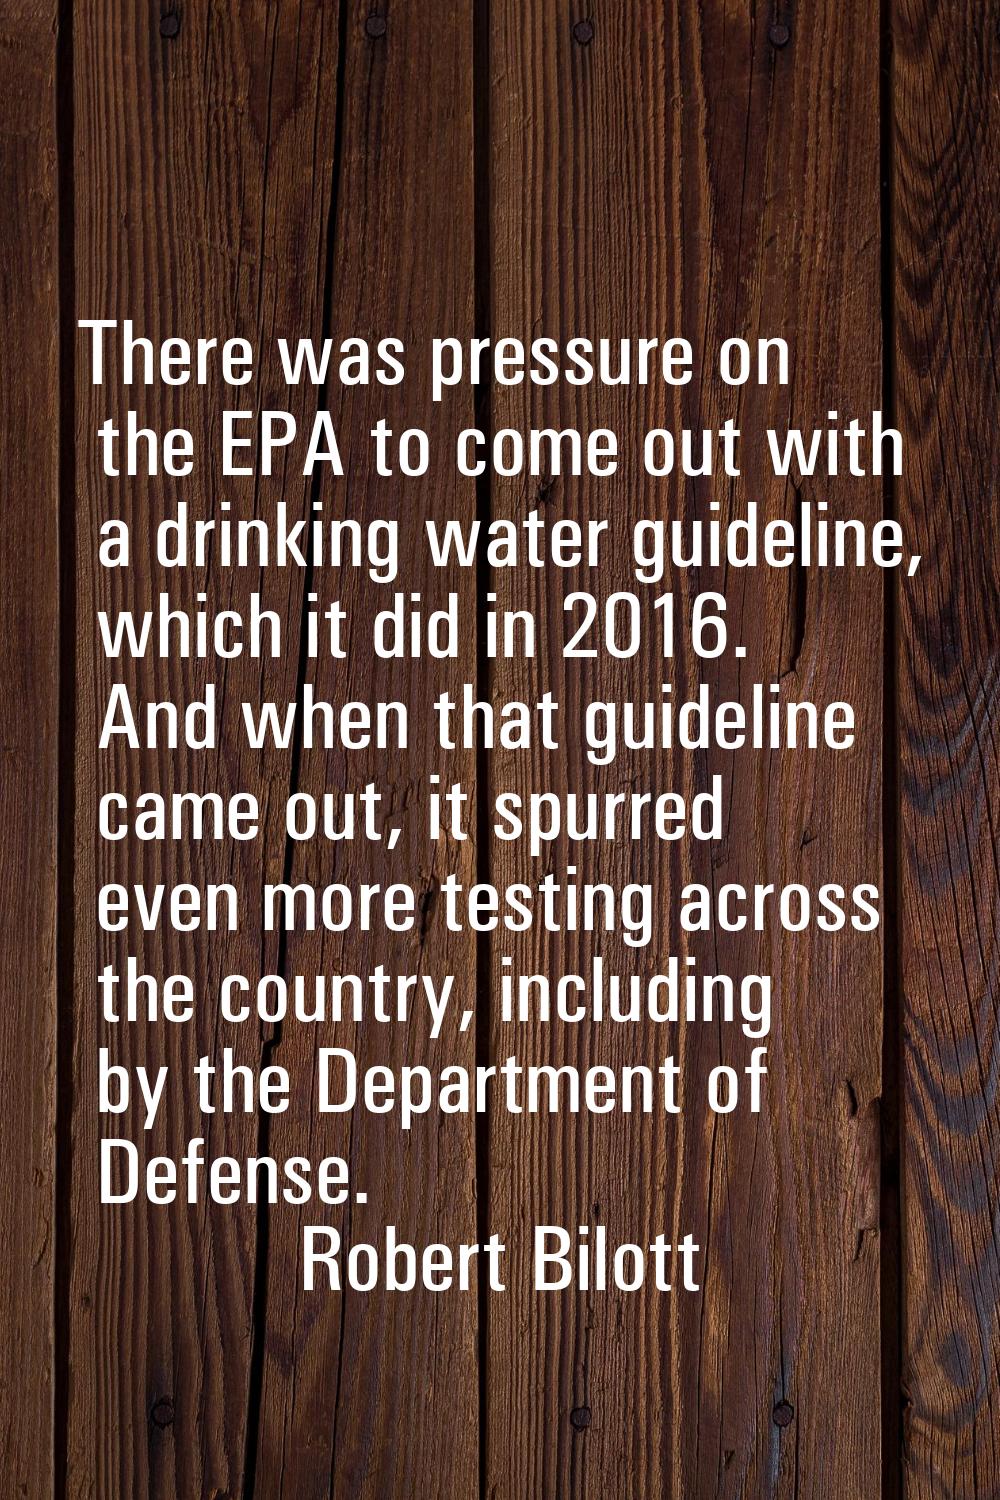 There was pressure on the EPA to come out with a drinking water guideline, which it did in 2016. An